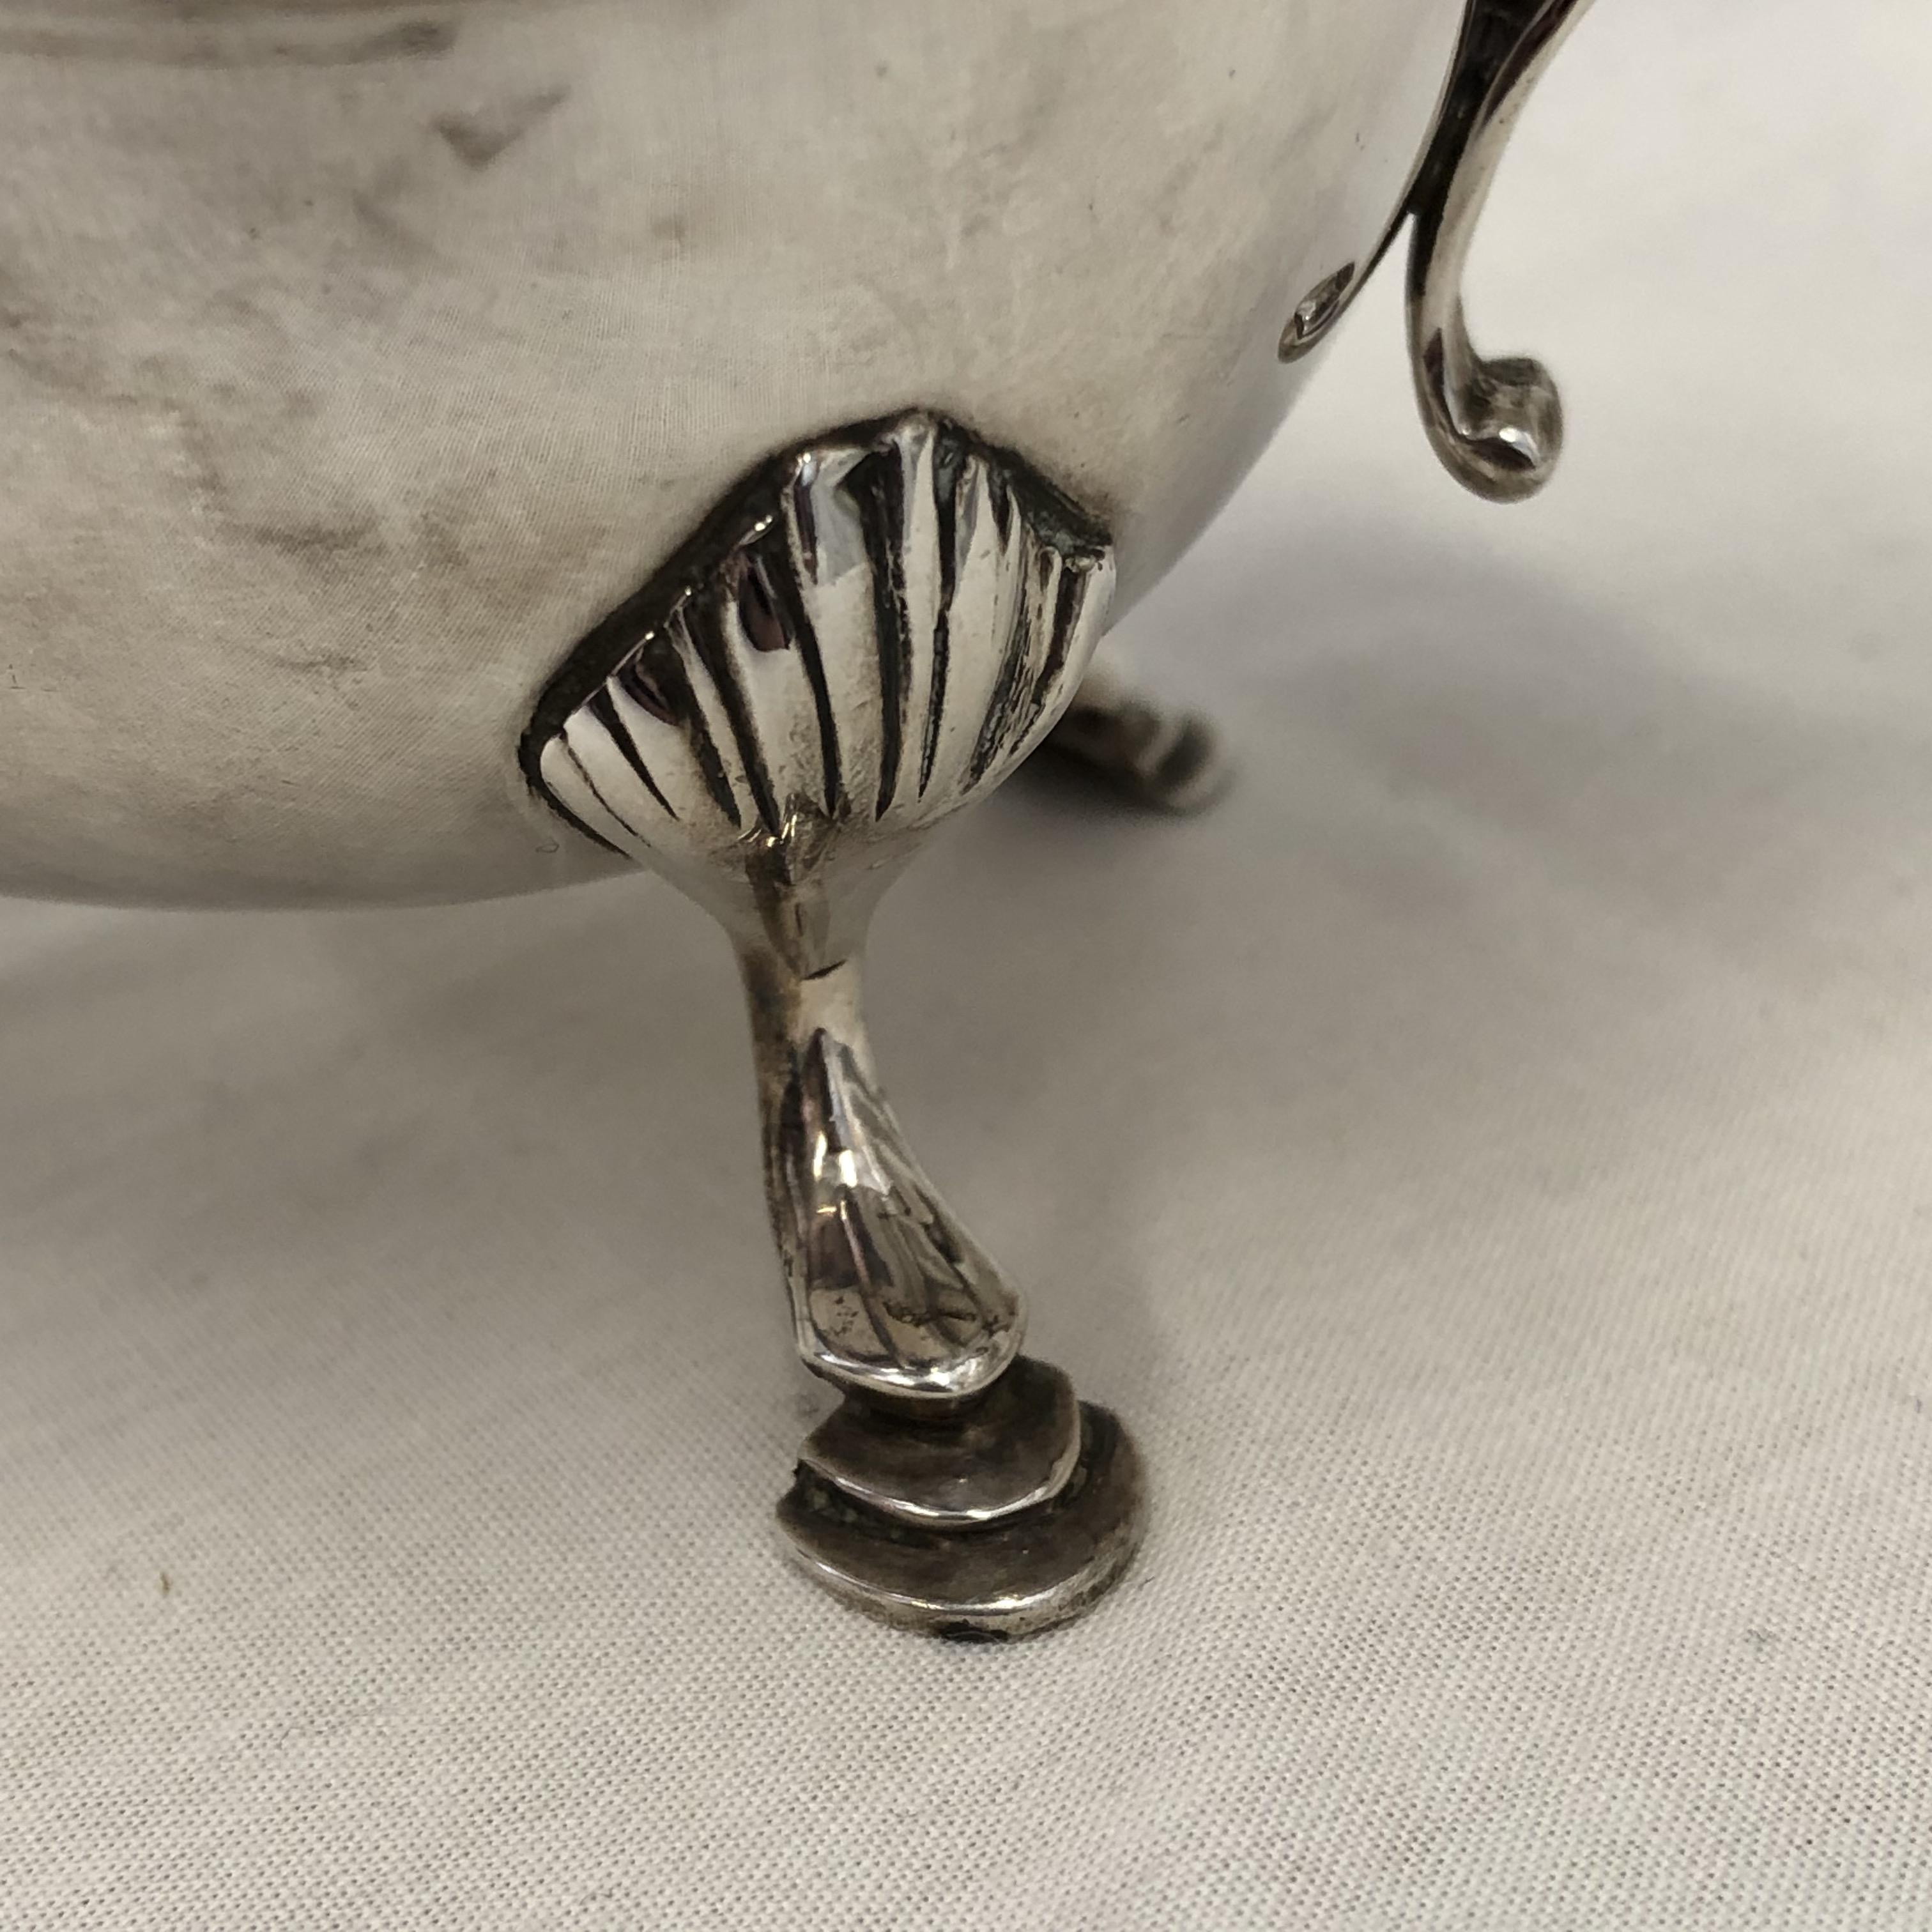 SILVER SAUCE BOAT WITH OPEN SCROLL HANDLE RAISED ON CABRIOLE LEGS WITH PAD FEET, 3.3OZ APPROX. - Image 2 of 4